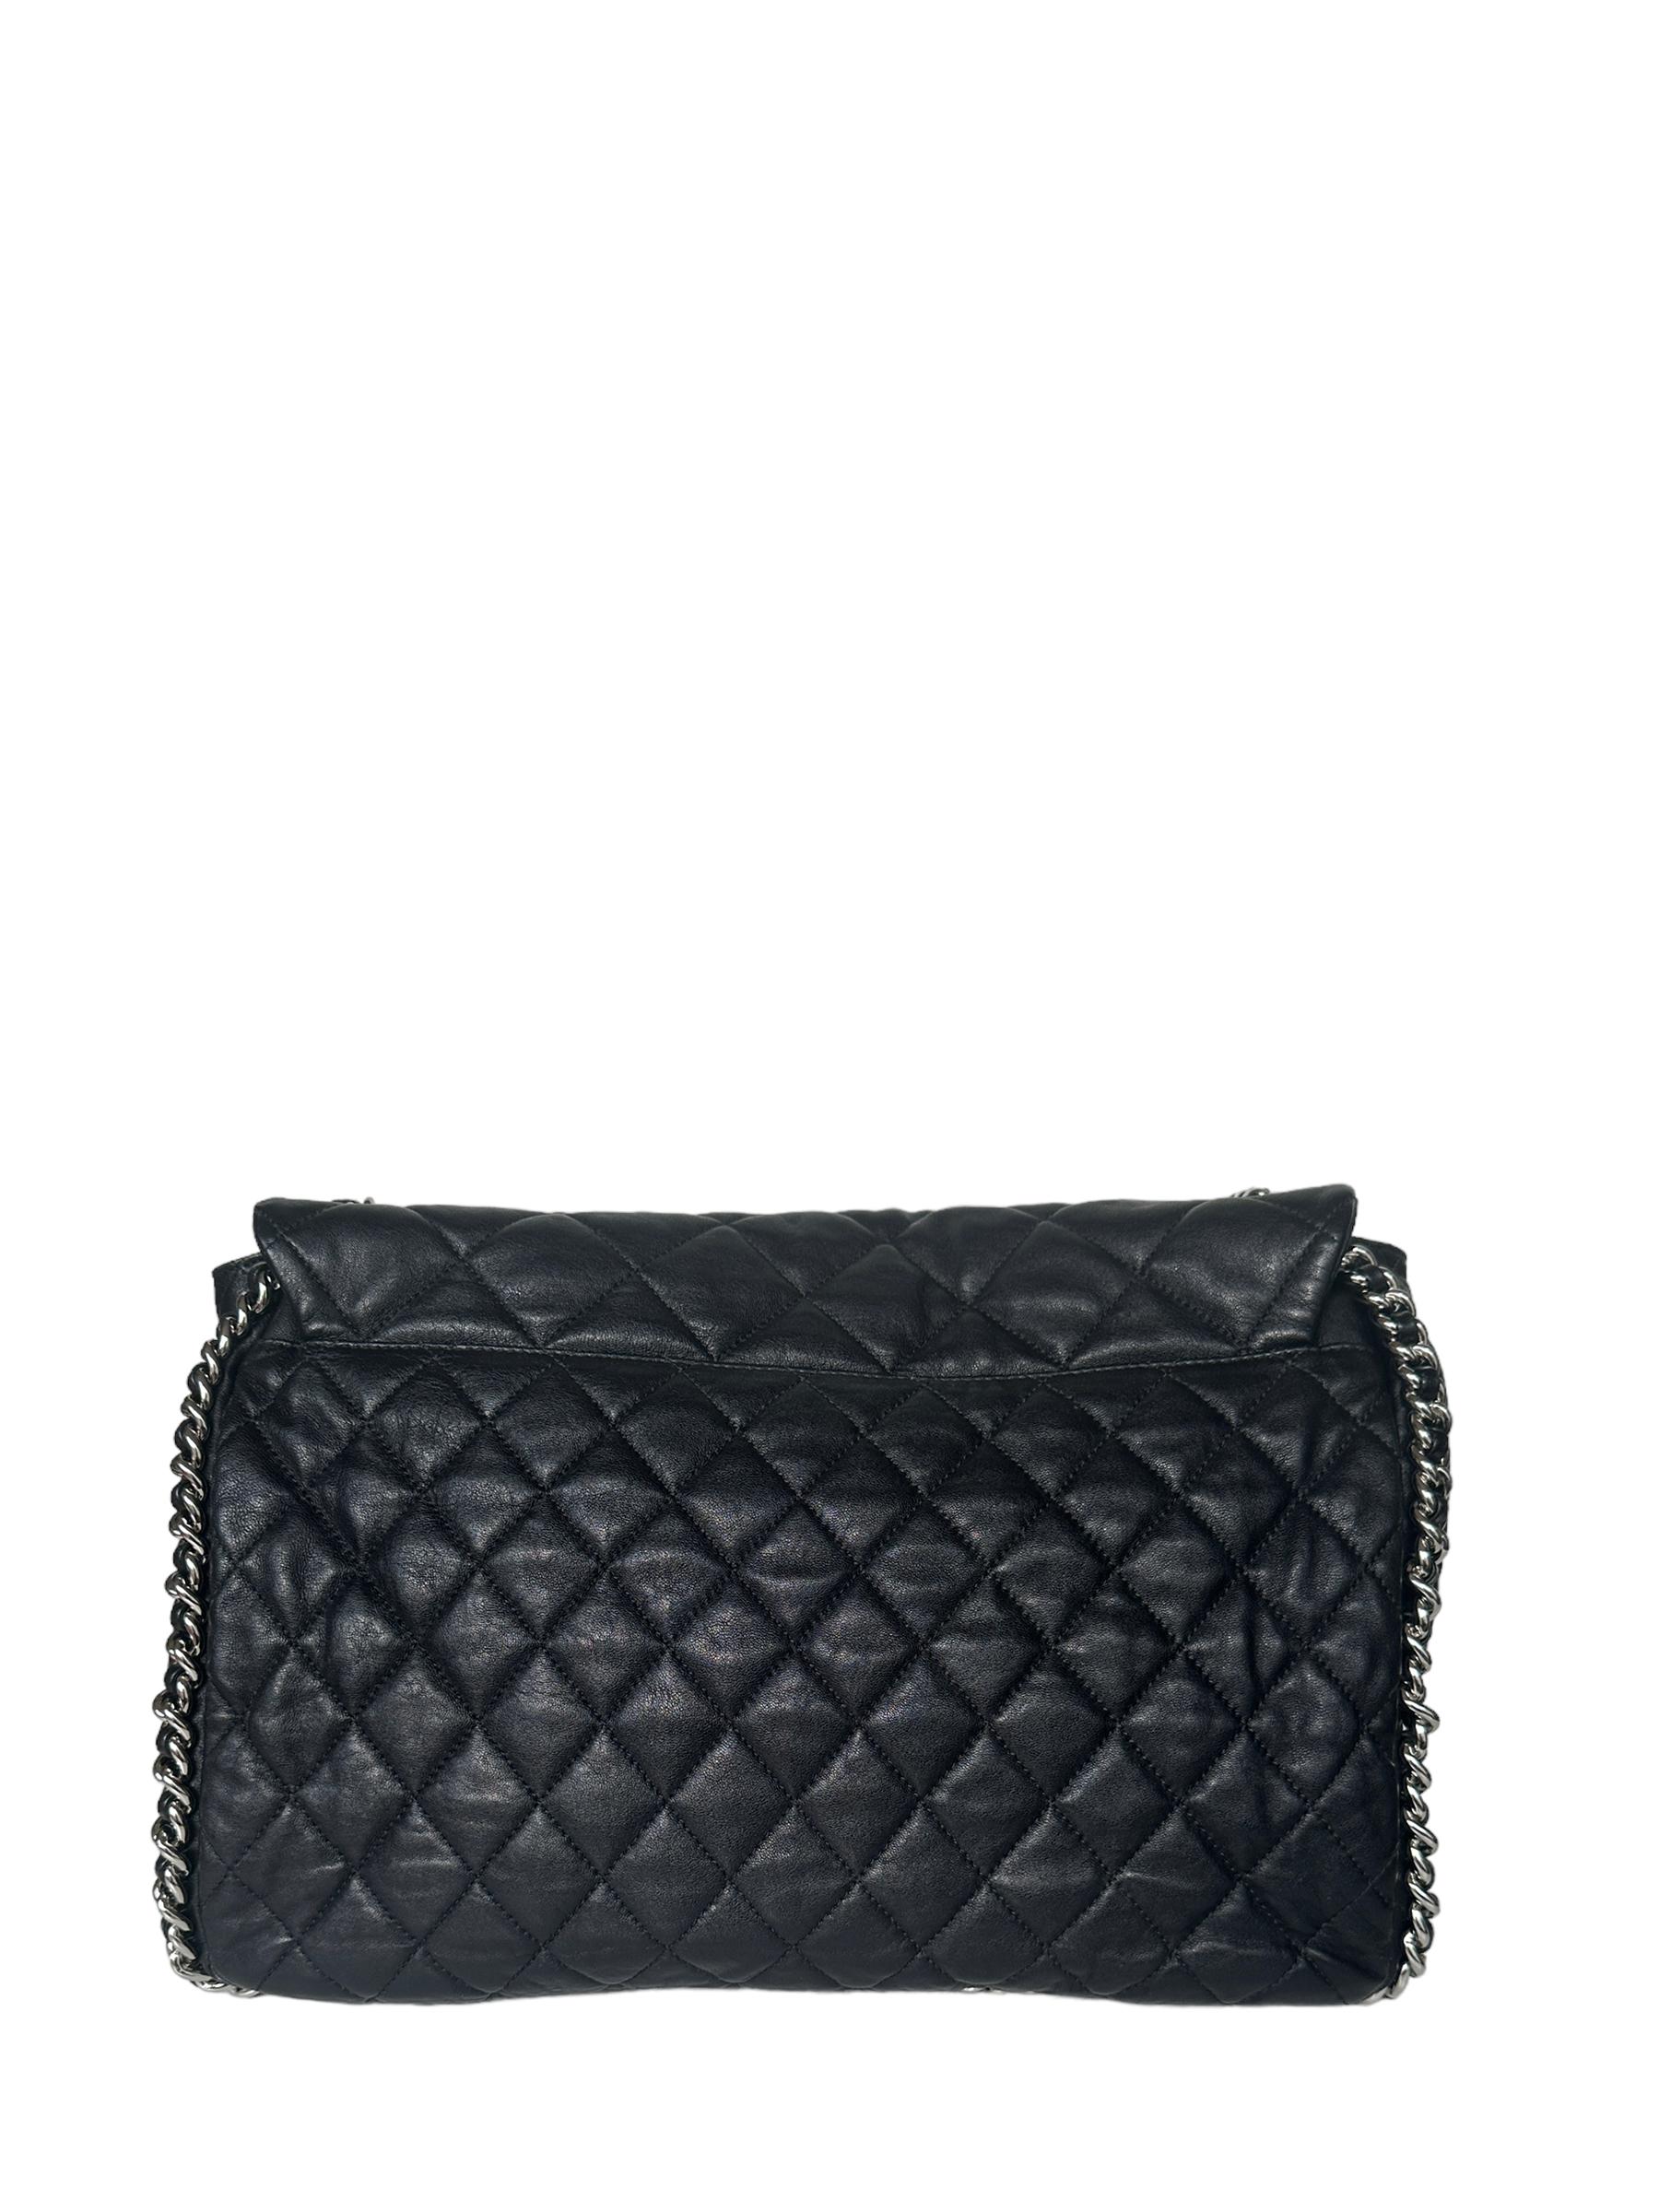 Chanel Black Washed Lambskin Quilted Maxi Chain Around Flap Bag

Made In: Italy
Year of Production: 2011
Color: Black
Hardware: Silvertone
Materials: Washed lambskin leather
Lining: Beige textile
Closure/Opening: Flap top with magnet
Exterior